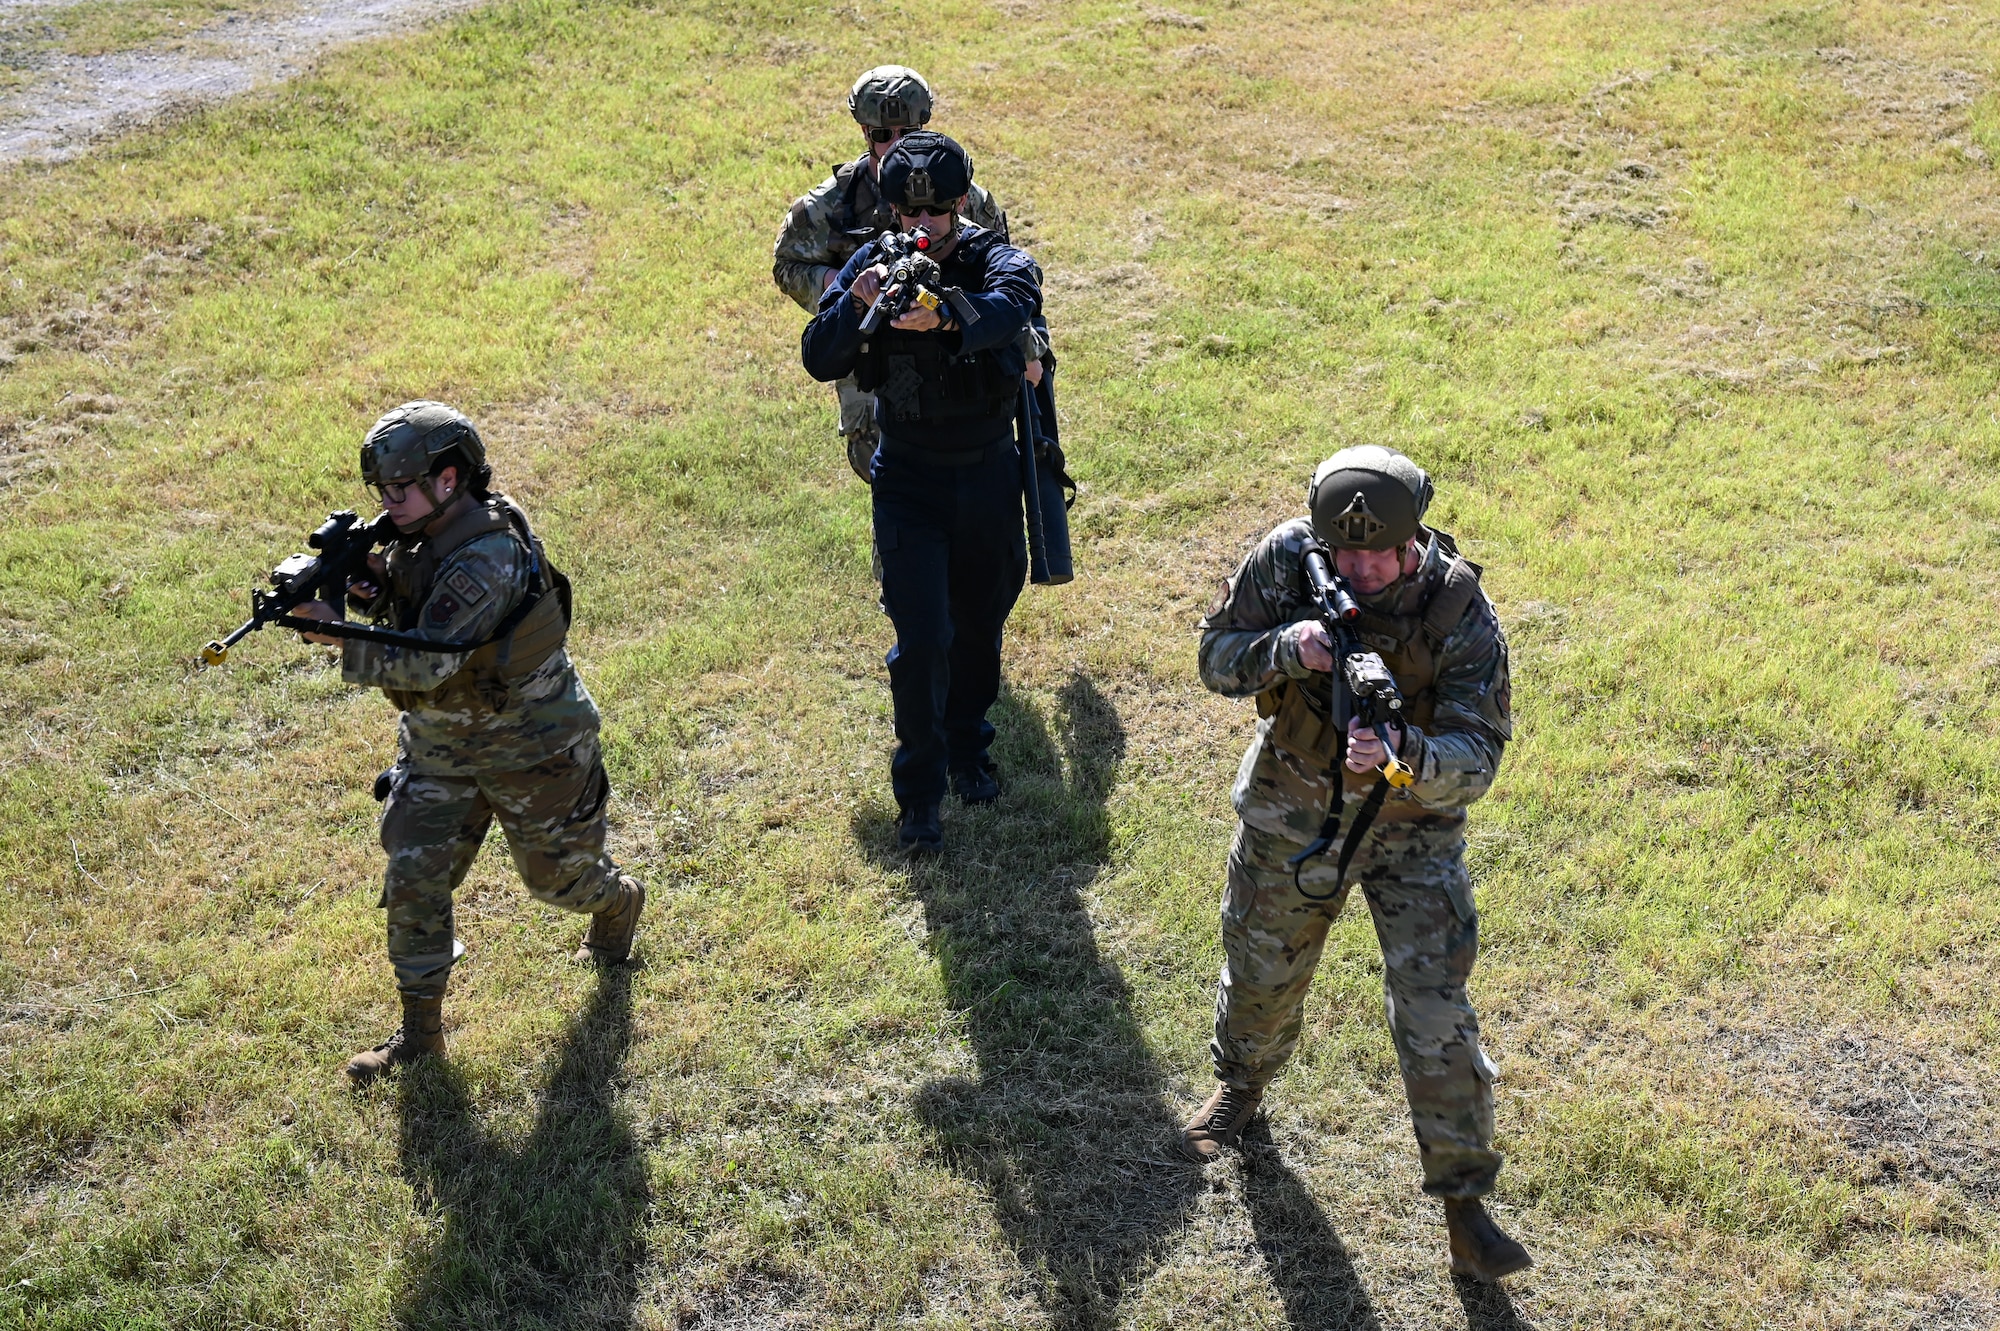 U.S. Air Force Airmen from the 47th Security Forces Squadron prepare to clear a simulated barricaded building during a base tour with the U.S. Border Patrol, Del Rio Sector leadership and the Val Verde County Sheriff's Department at Laughlin Air Force Base, Texas, Aug. 4, 2023. The Airmen demonstrated their ability to clear buildings to showcase their capabilities. (U.S. Air Force photo by Airman 1st Class Keira Rossman)